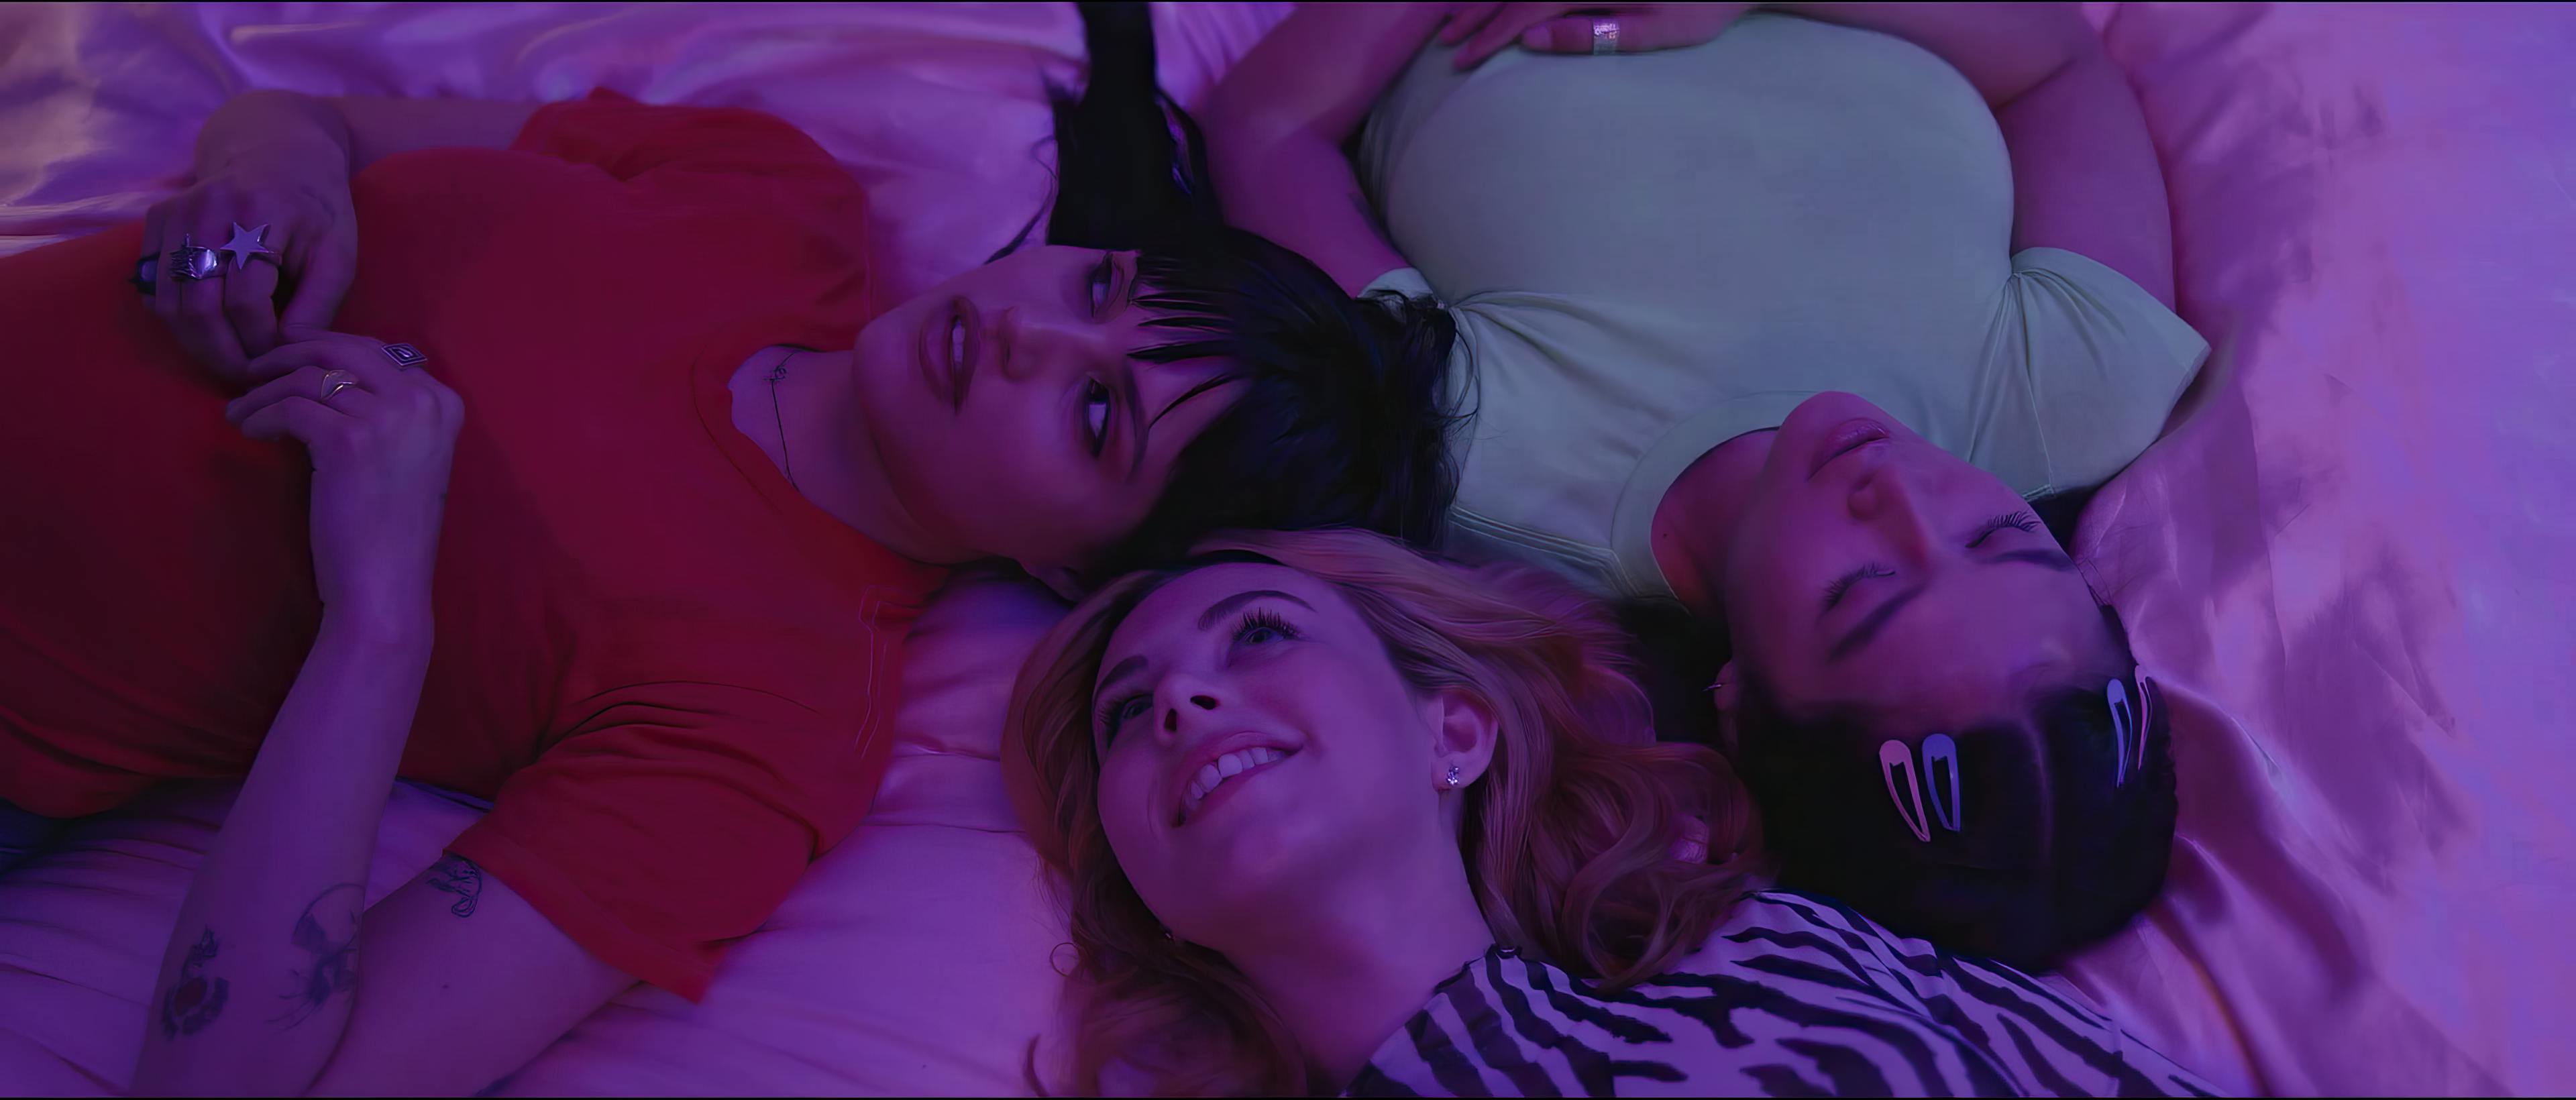 Three individuals lie close together on a bed, their heads forming a circle in the center. They appear relaxed and content in each other's company, illuminated by a soft, purple glow that sets a tranquil mood. The intimate arrangement and warm lighting suggest a scene of friendship and comfort.